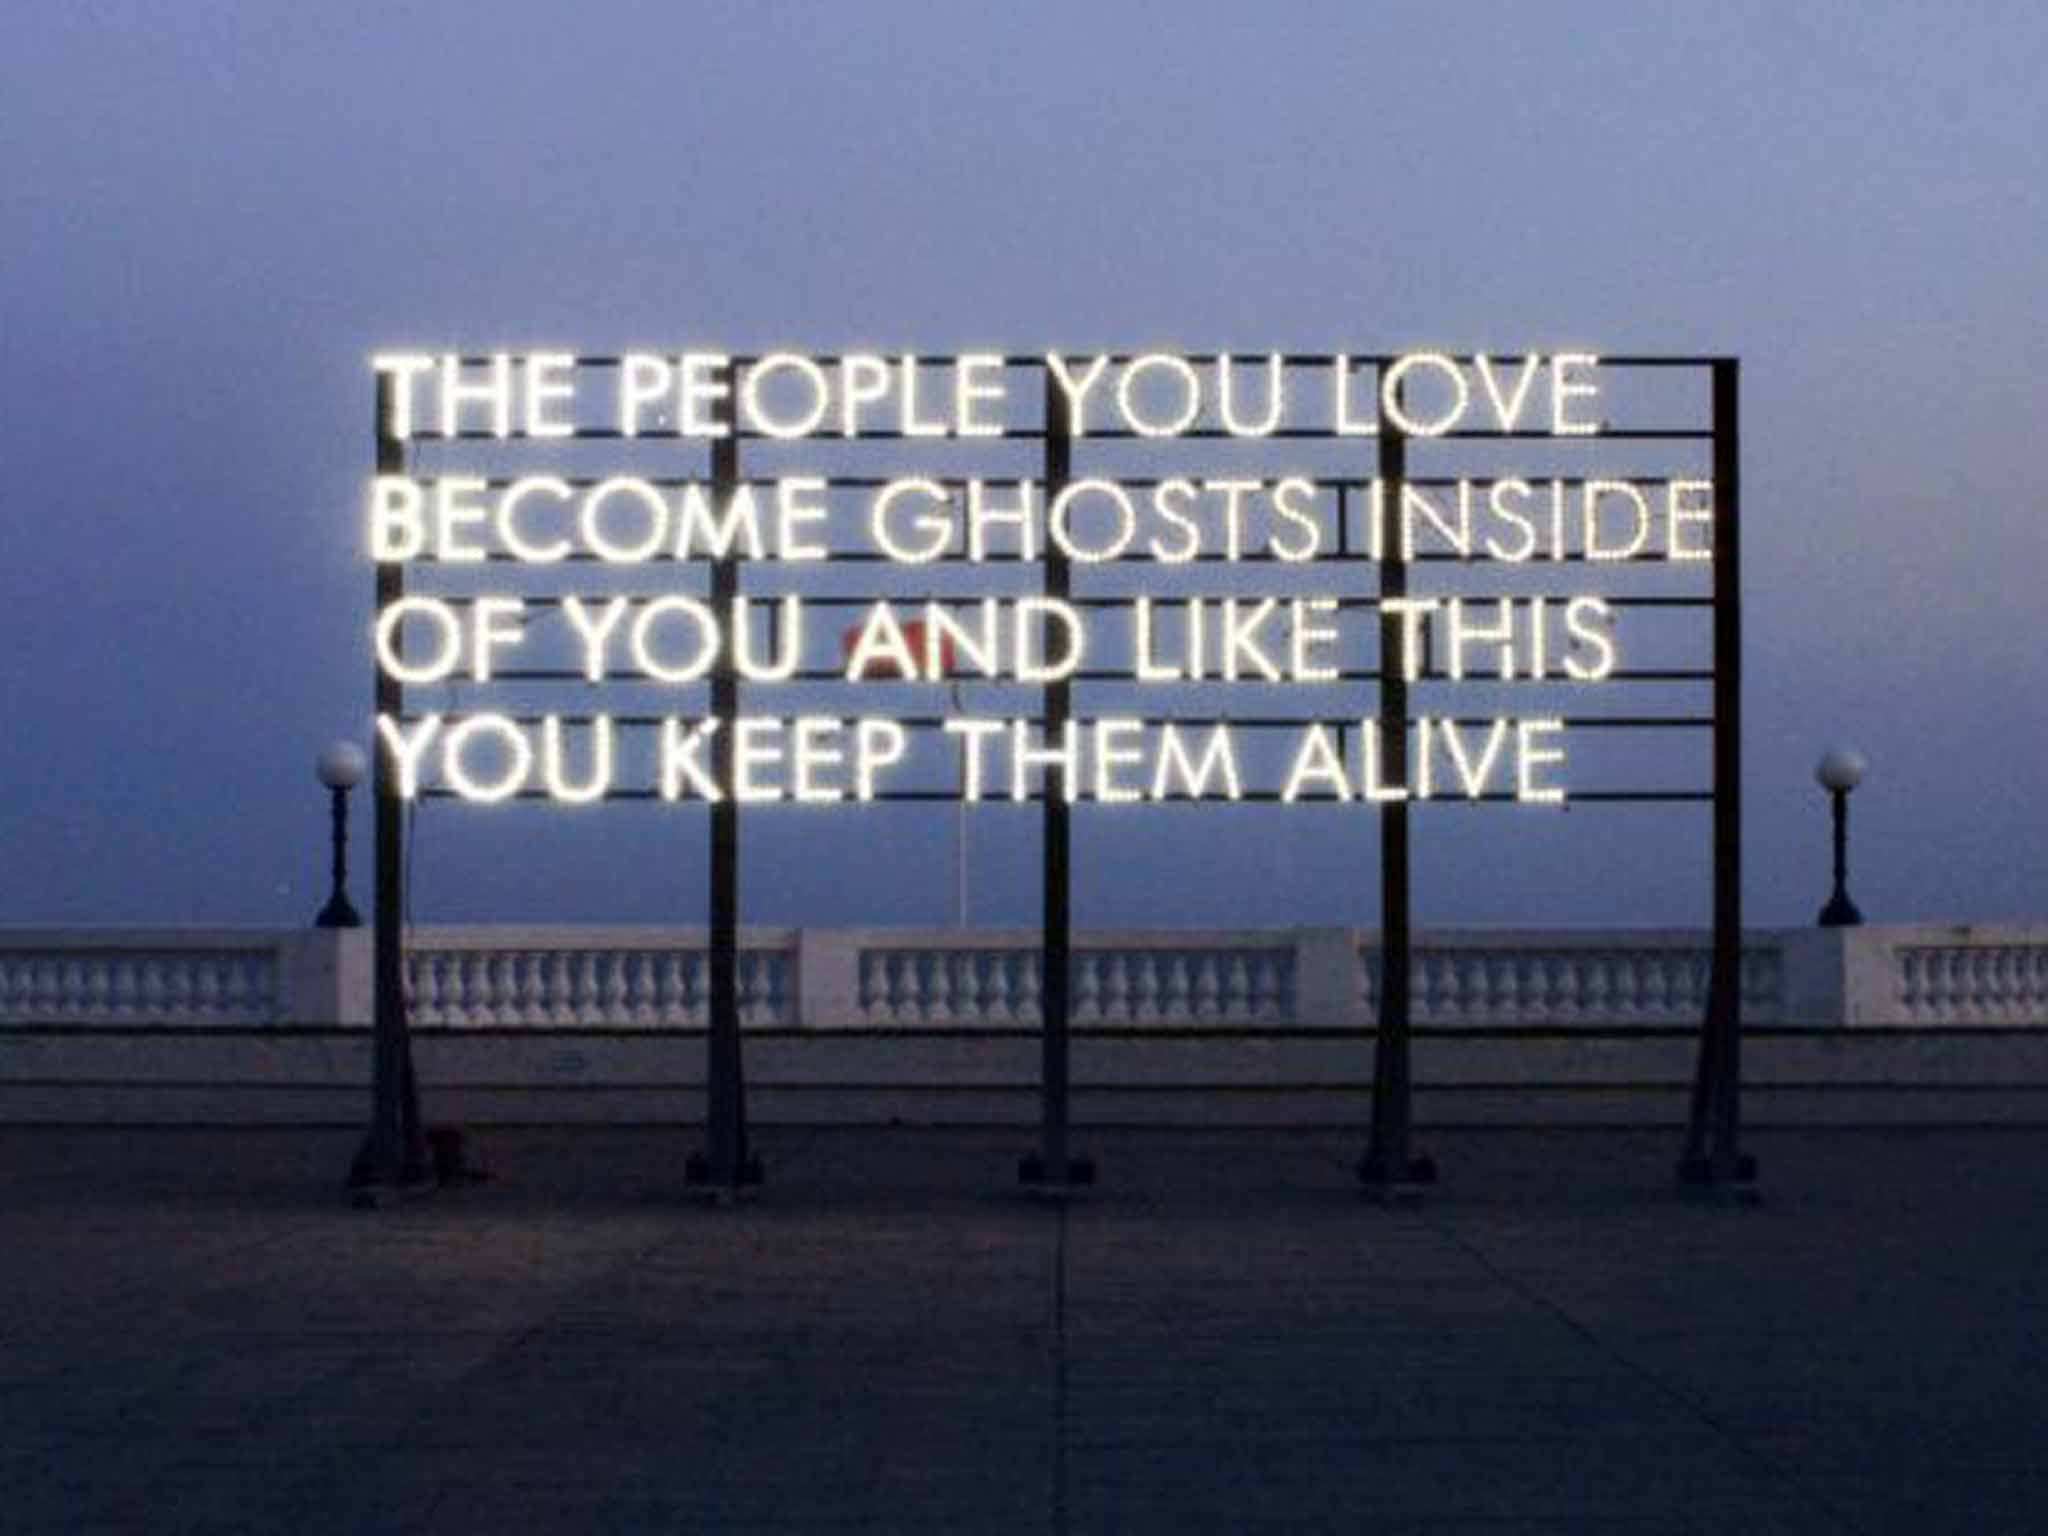 Installation poetry makes Robert Montgomery a canny choice for National Poetry Day